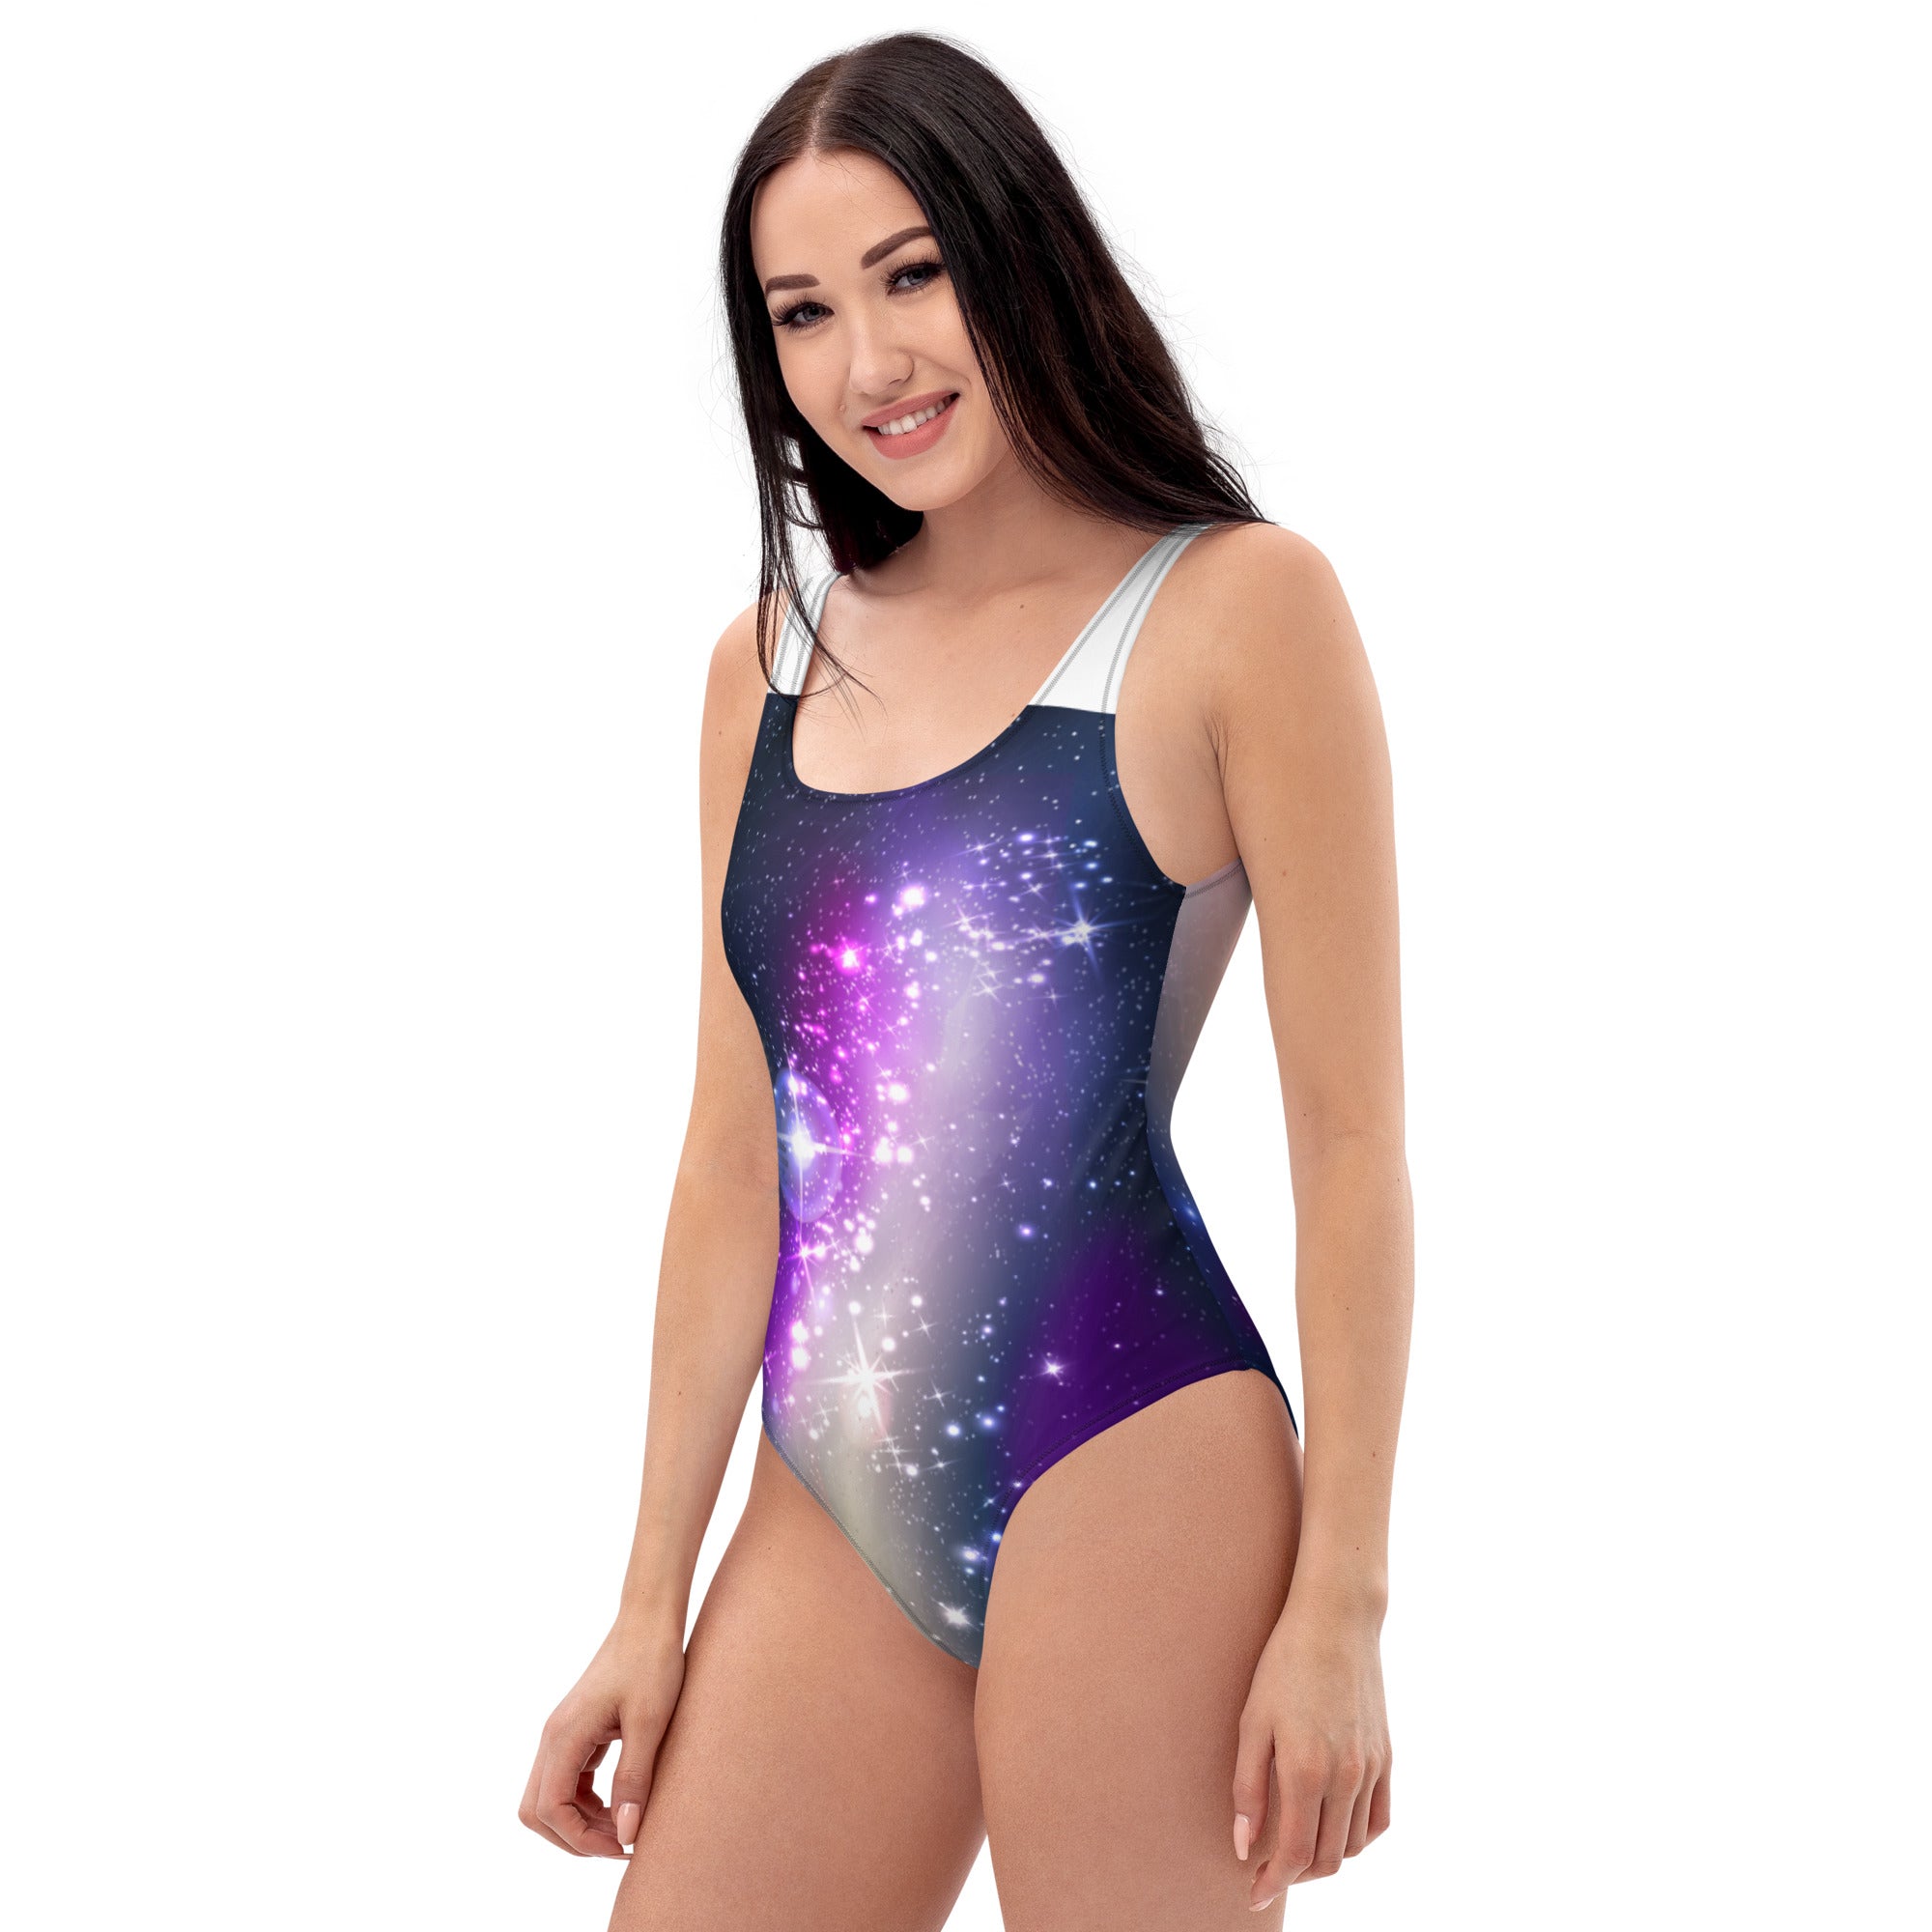 To The Moon Women's One-Piece Swimsuit